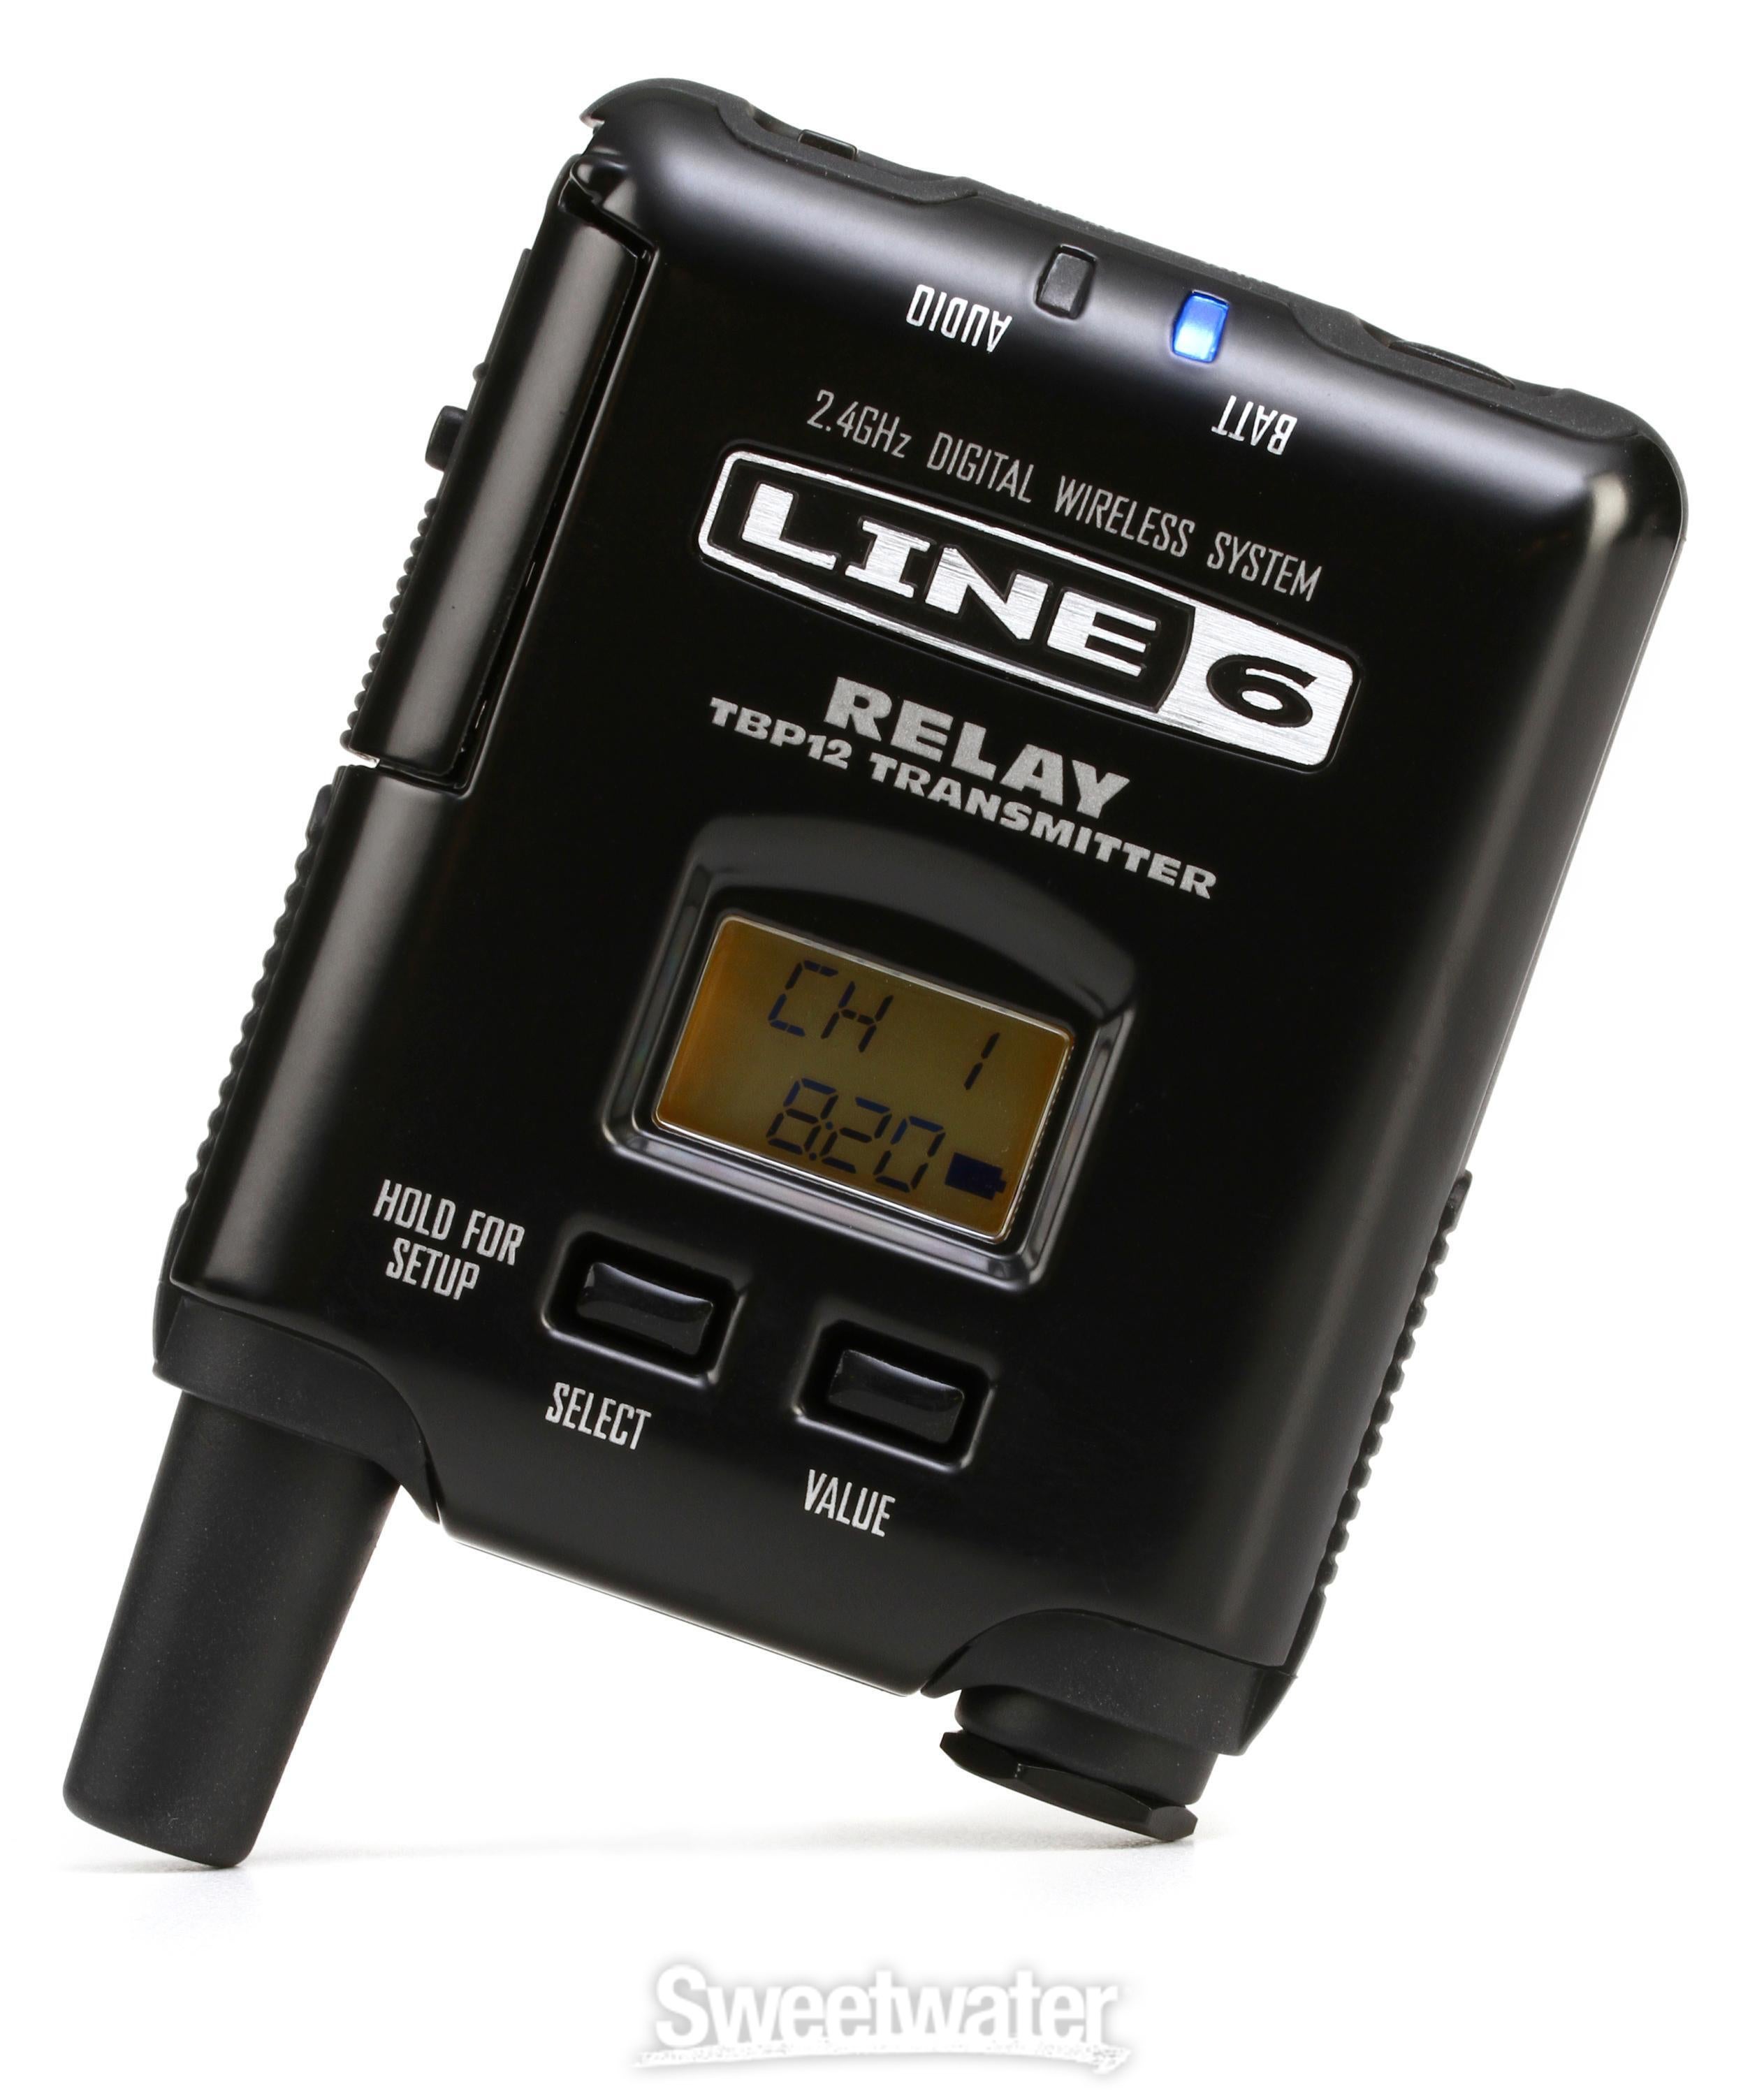 Line 6 TBP12 Wireless Bodypack Transmitter Reviews | Sweetwater